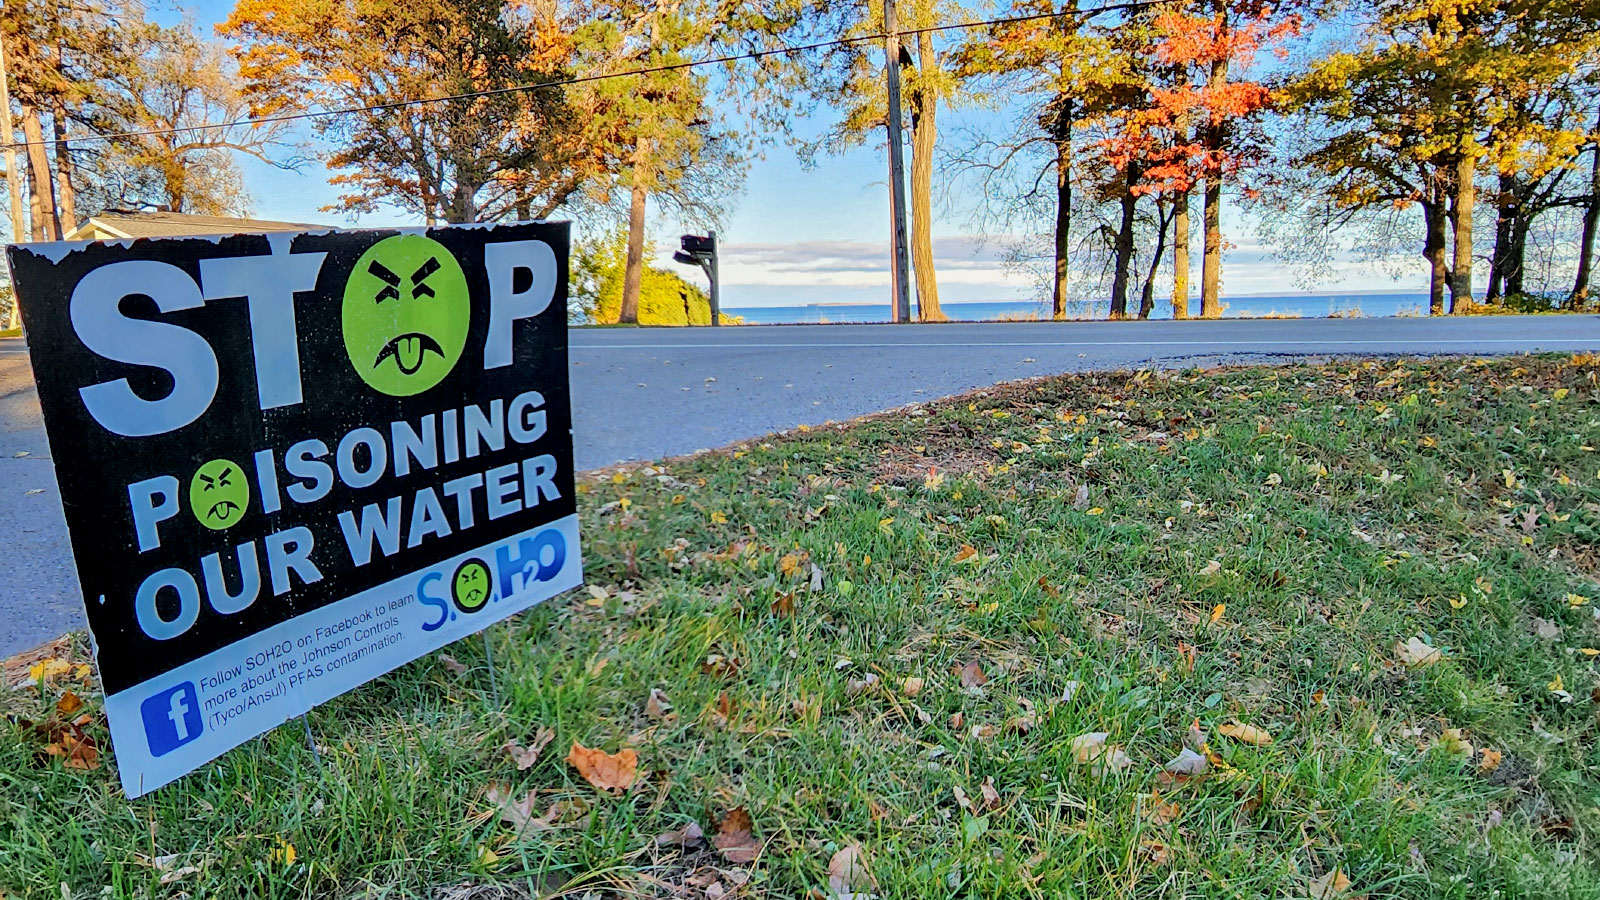 Low angle view of a sign reading "stop poisoning our water", with autumnal trees and a body of water behind it